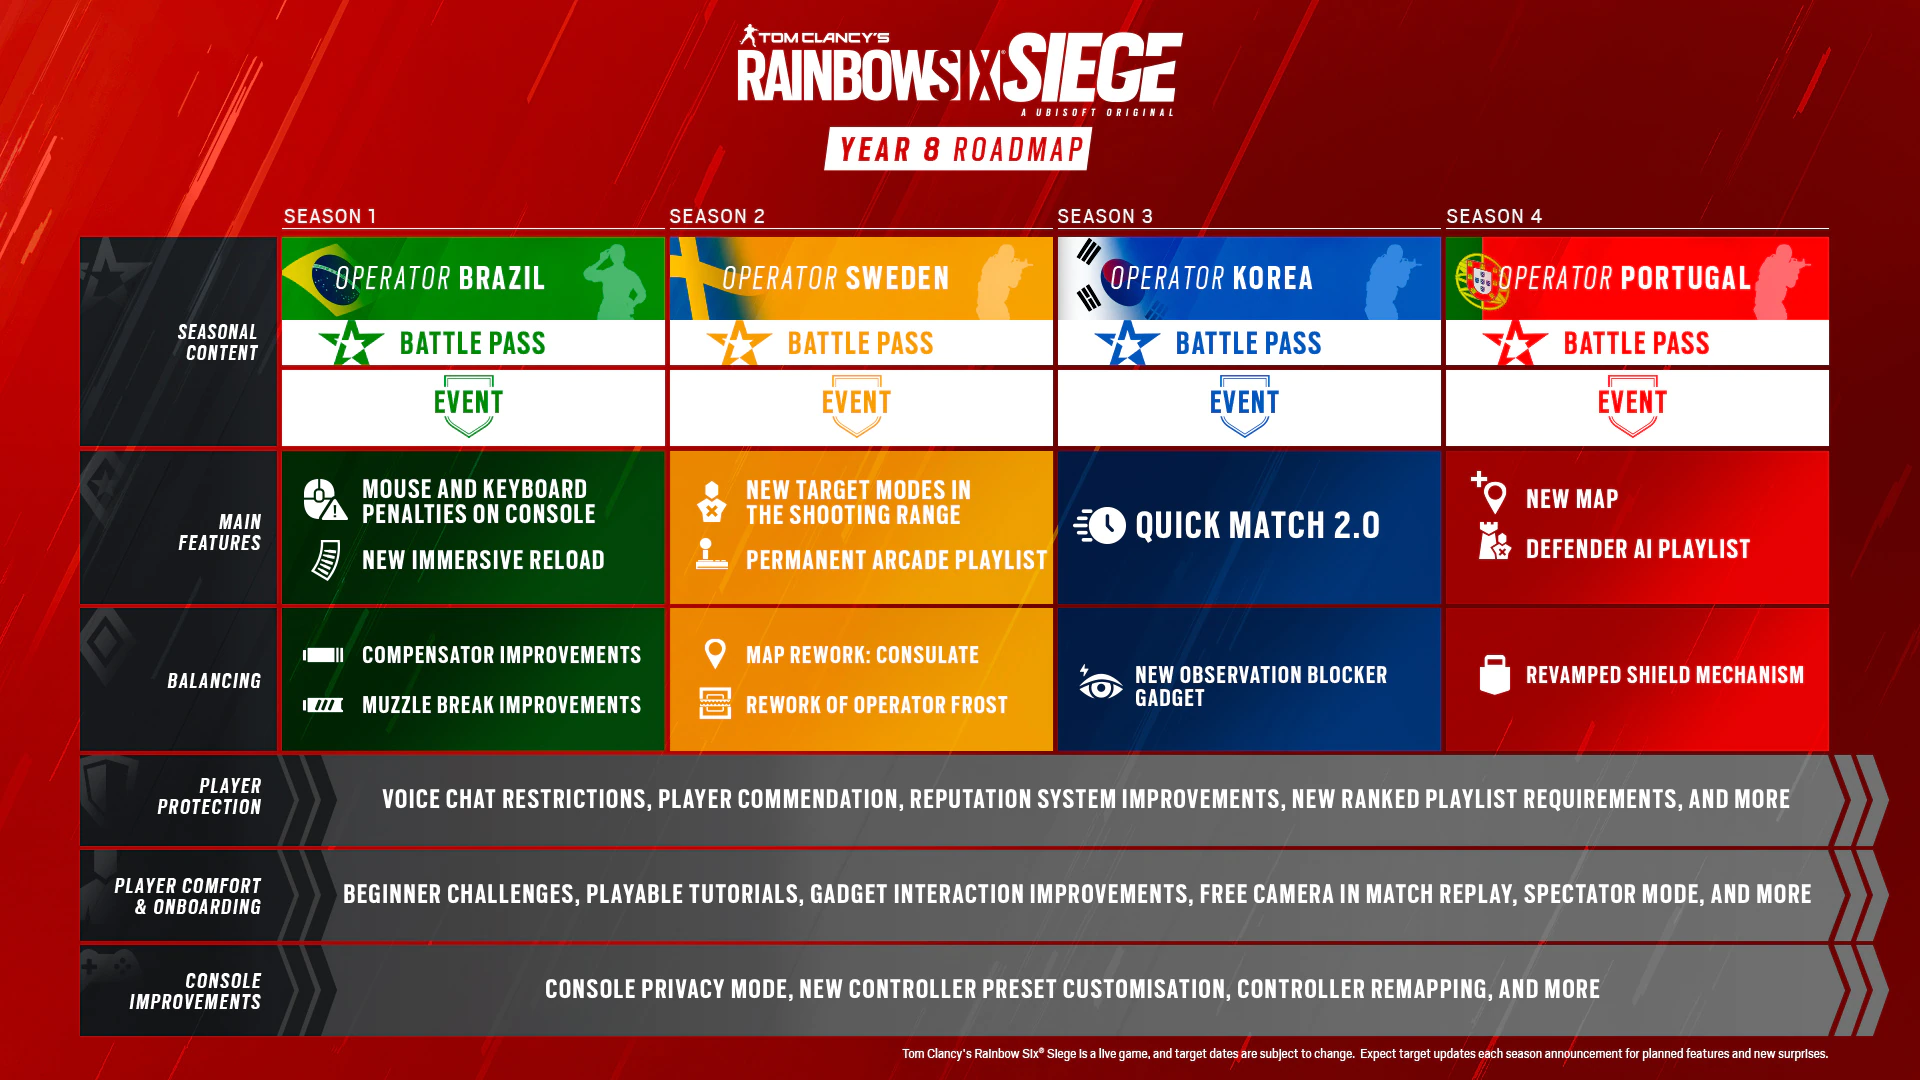 Rainbow Six Siege's development roadmap for year 8, showing the seasonal content, patch content and other releases planned by Ubisoft from March 2023